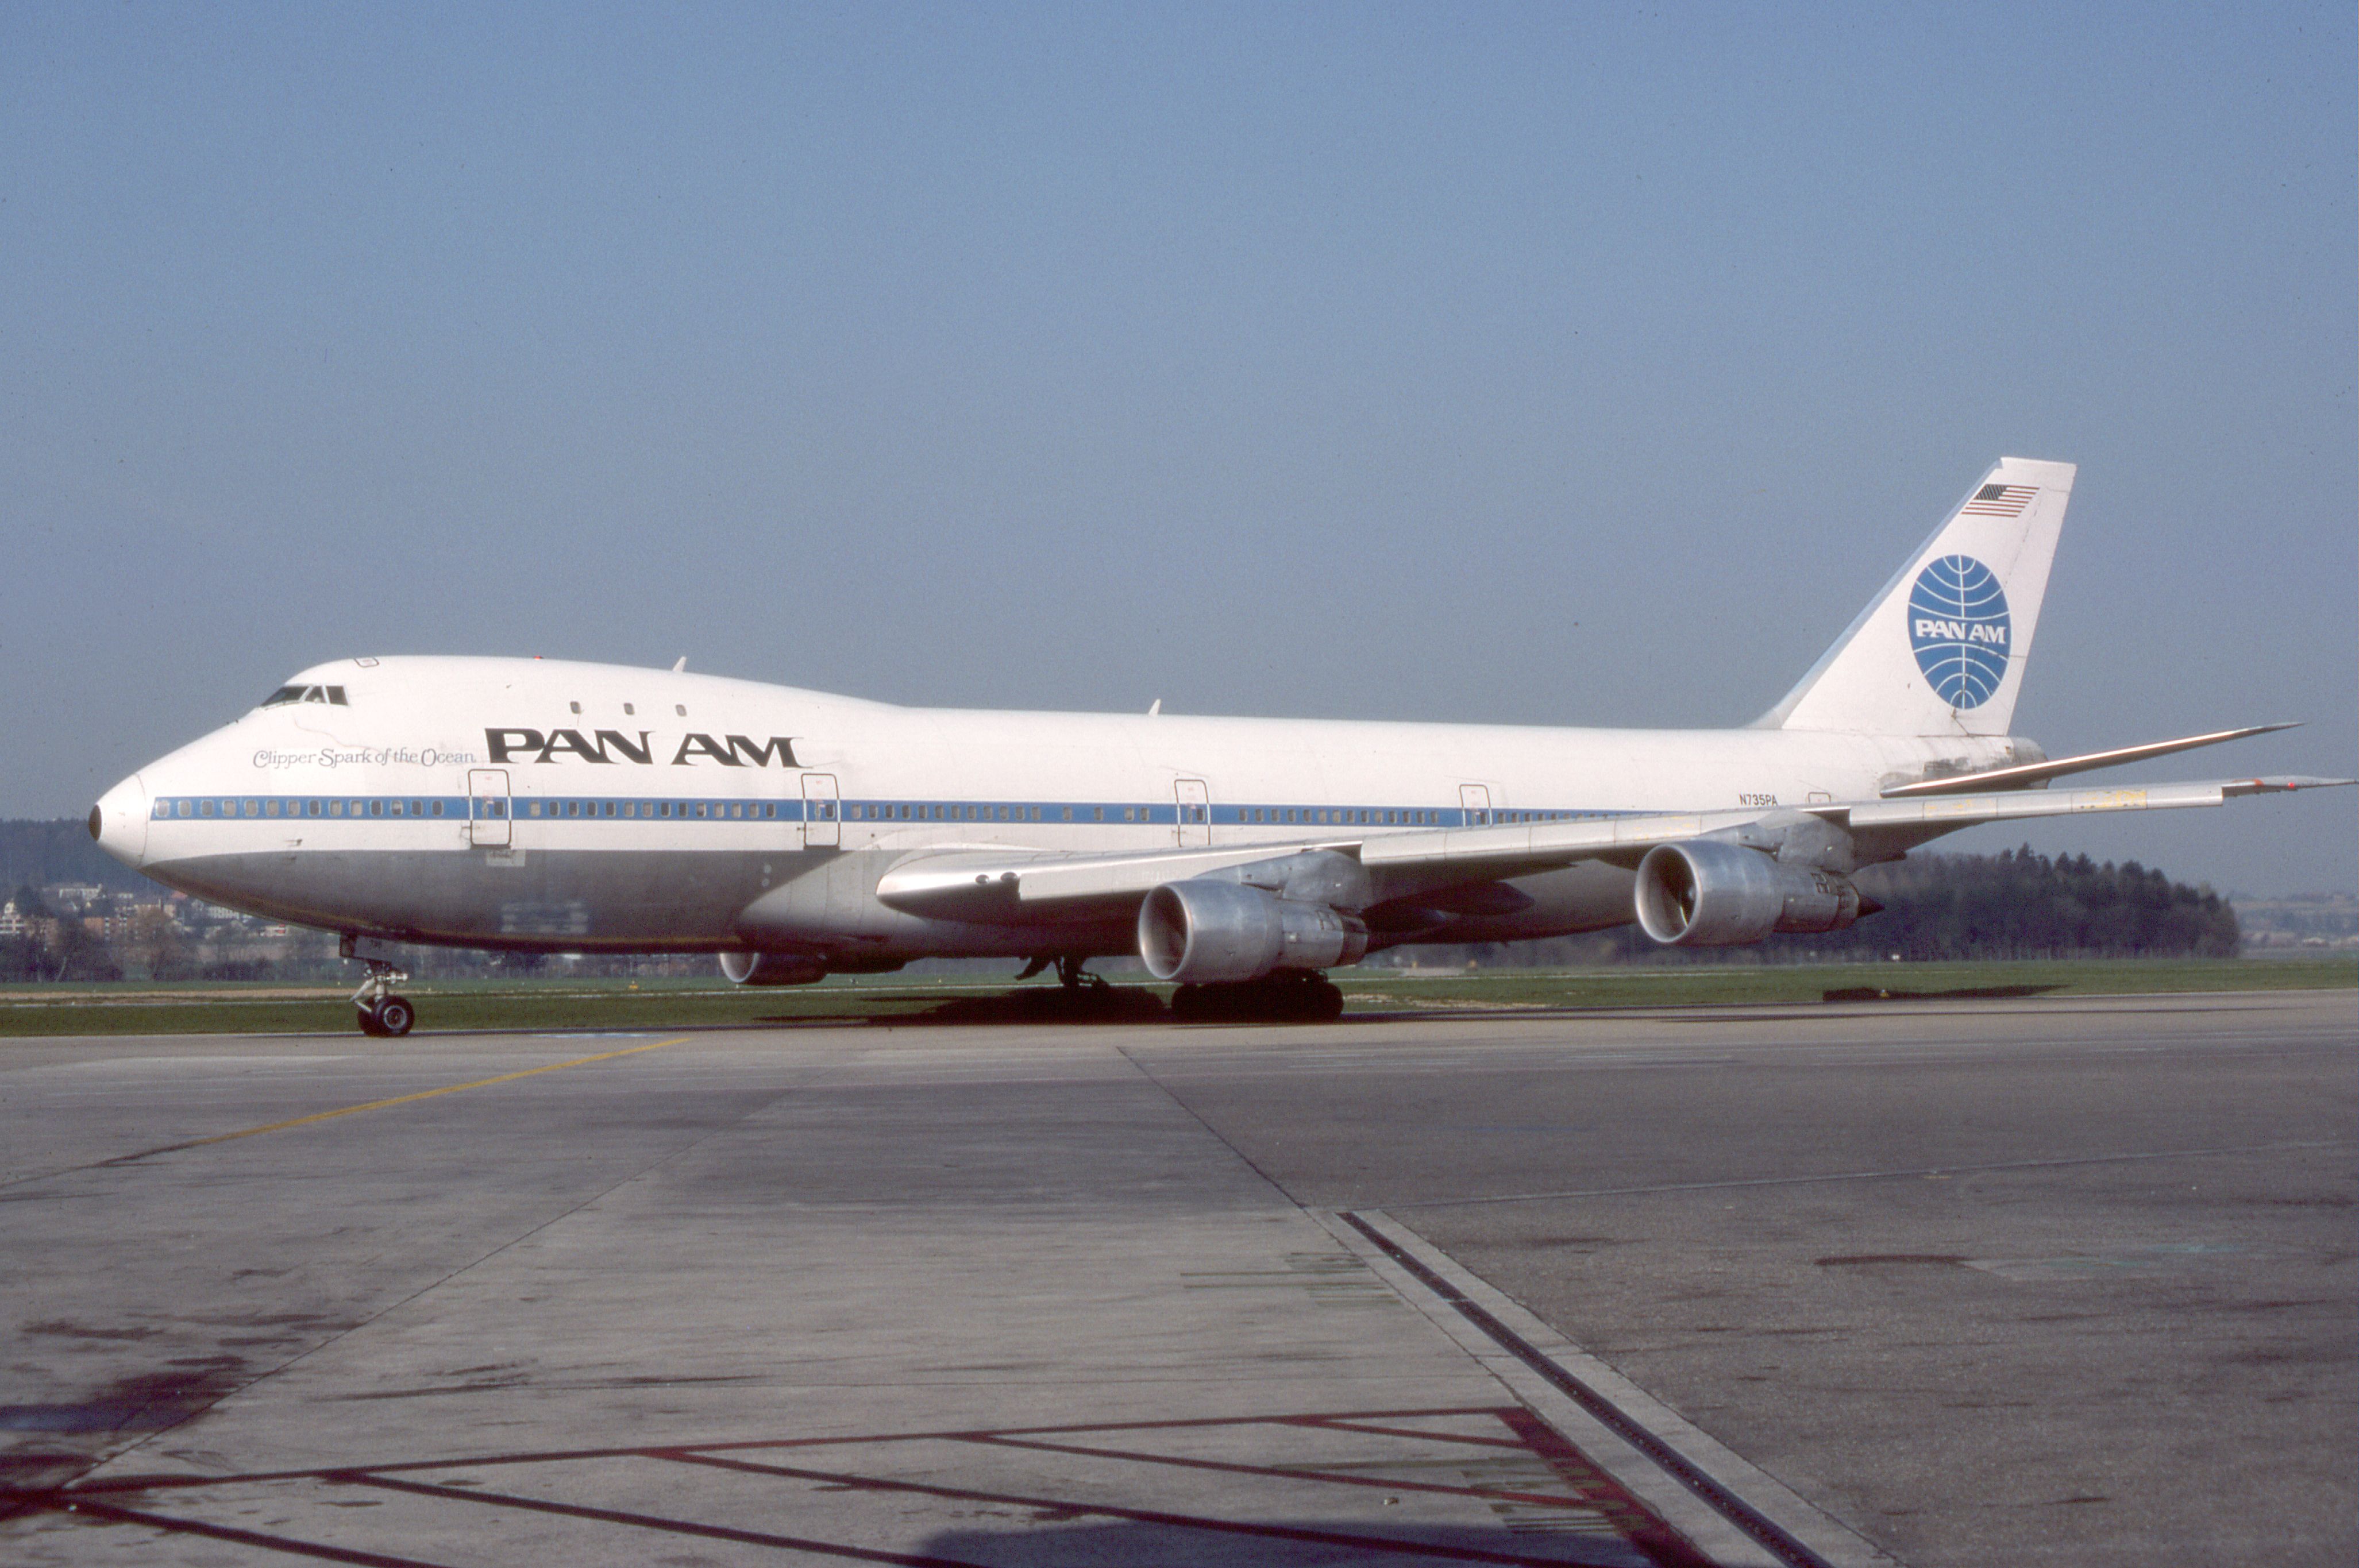 A Pan Am Boeing 747-100 taxiing to an airport gate.